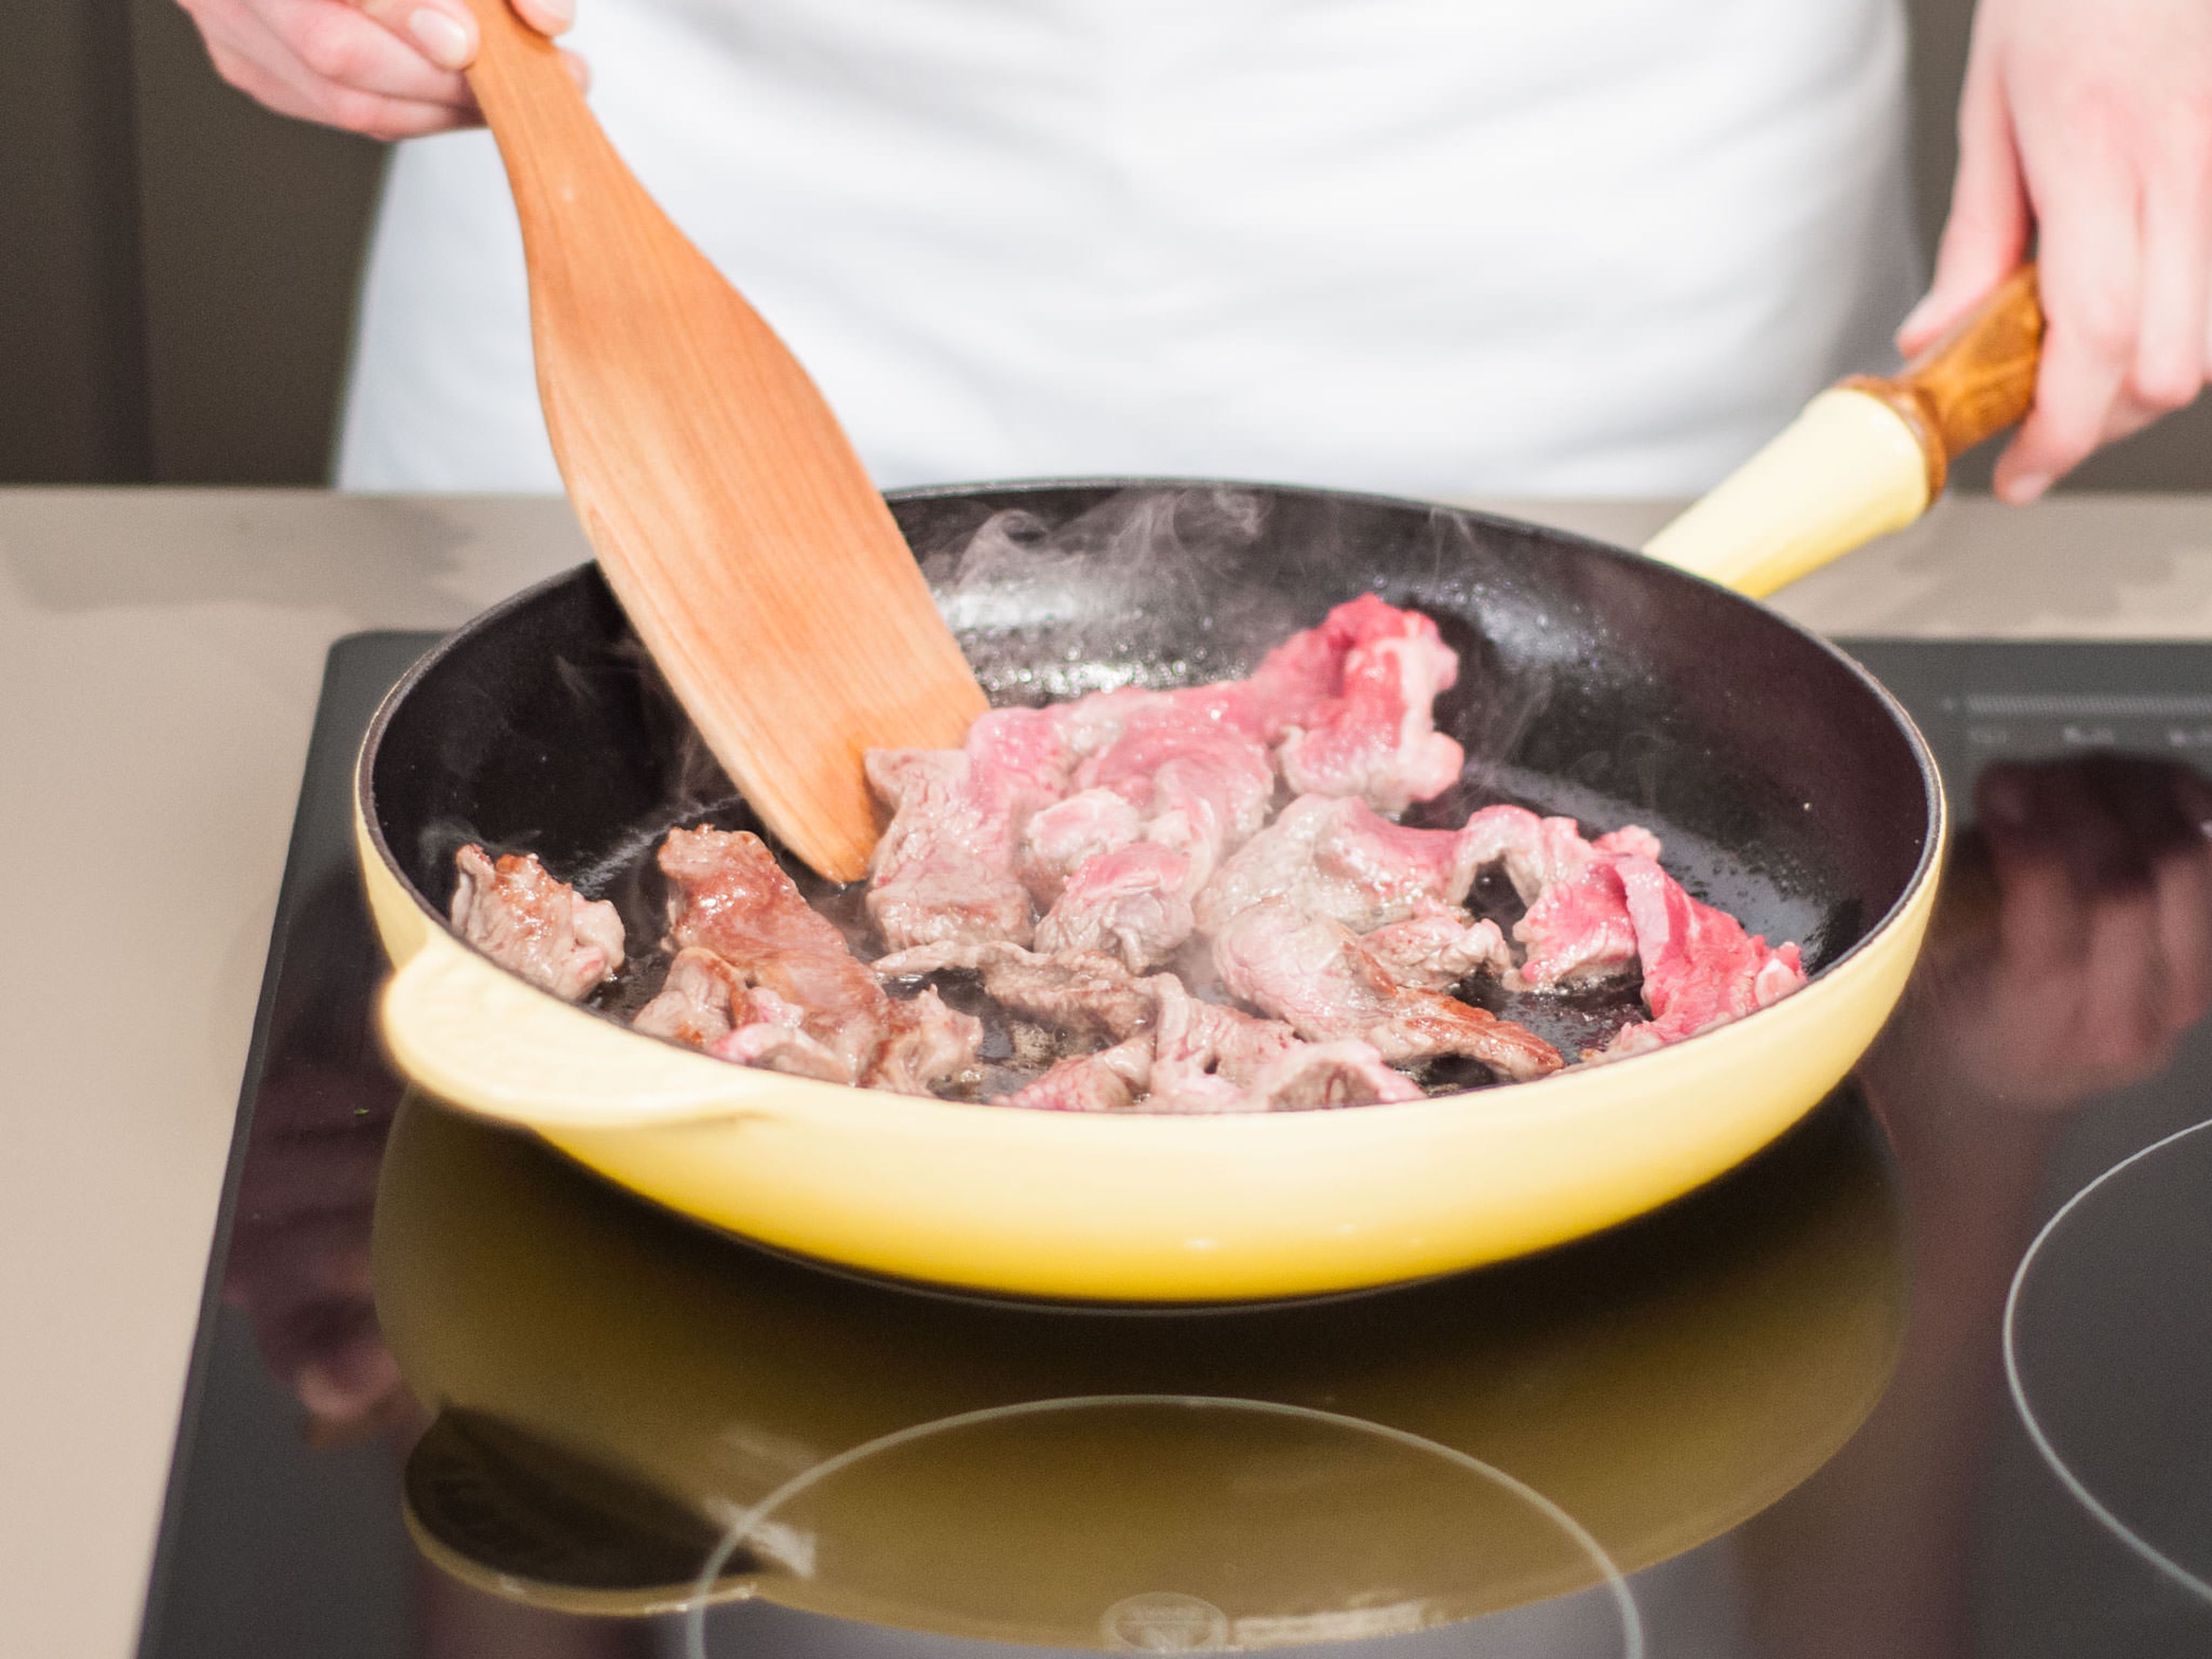 In a frying pan, sauté beef in some vegetable oil over medium-high heat for approx. 5 - 7 min. until browned.